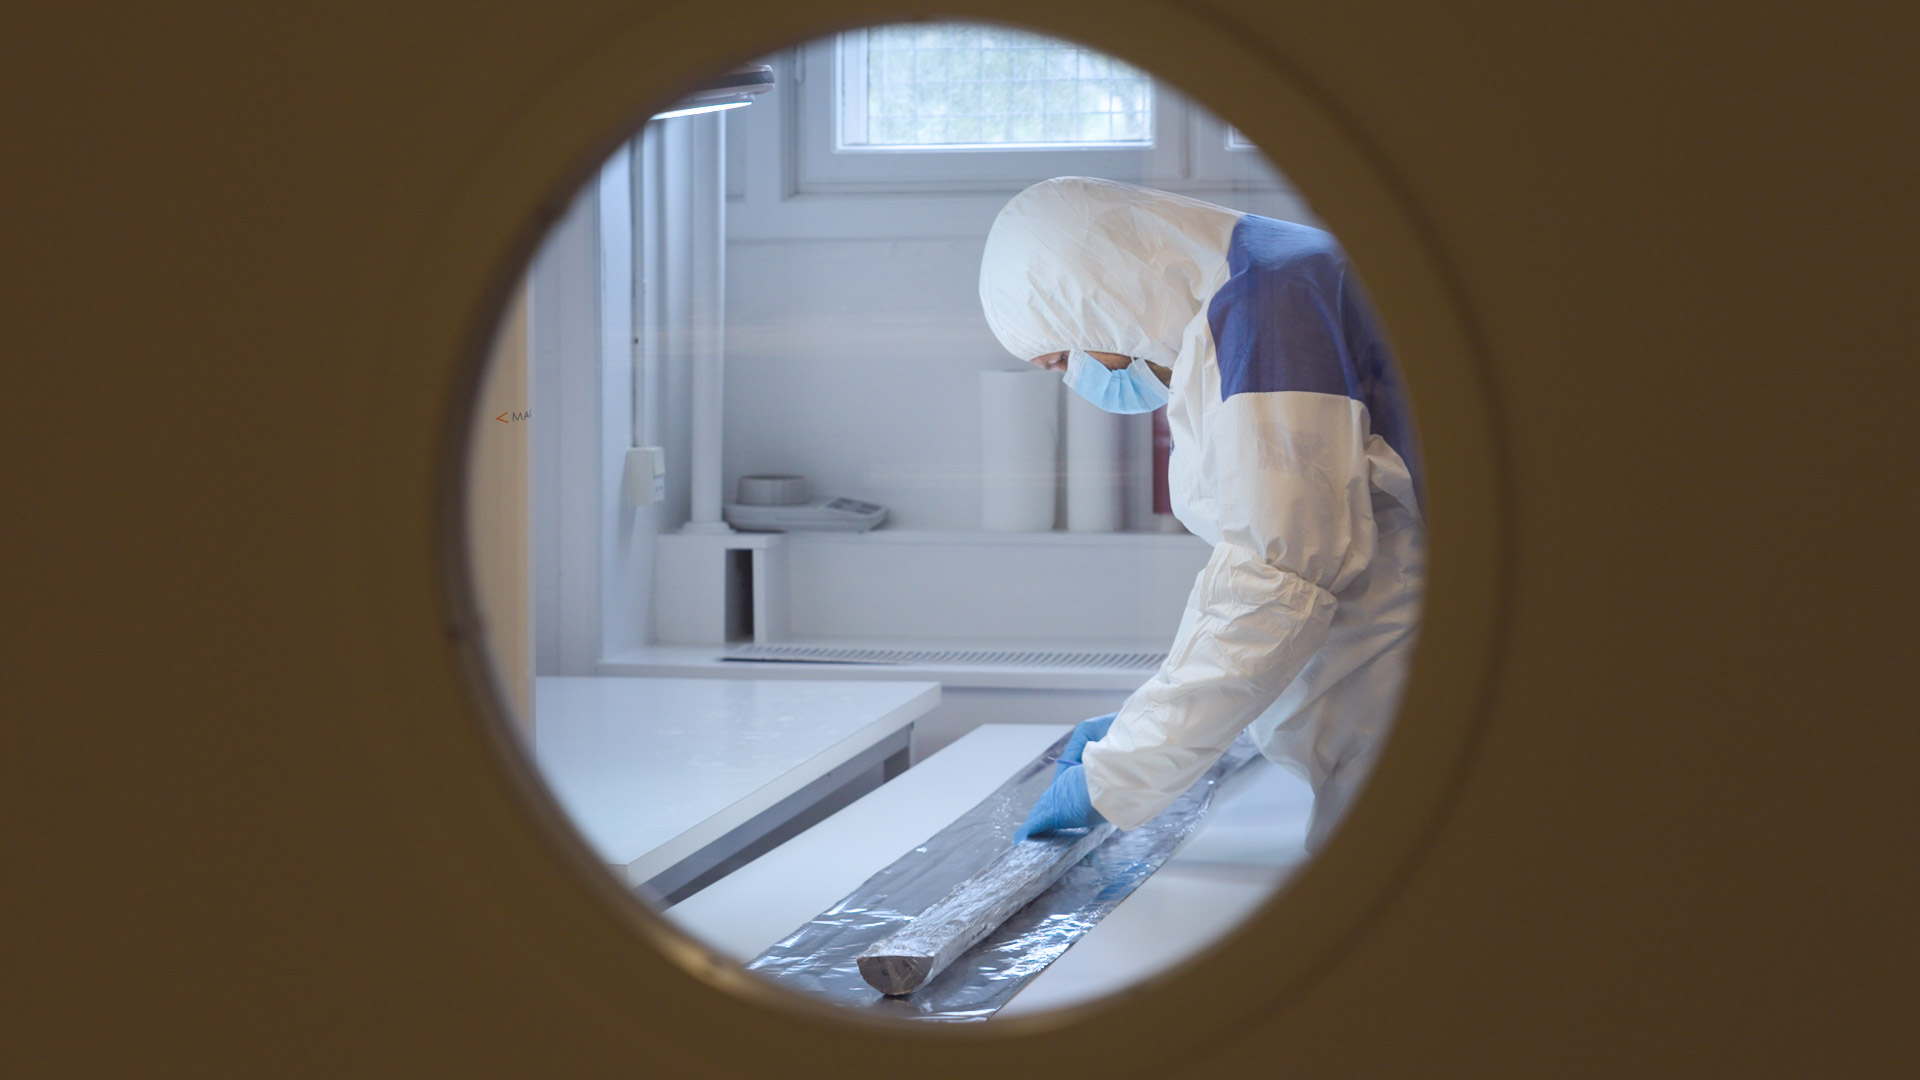 a scientist looking at a sample in a clean room, seen through a round window in the door